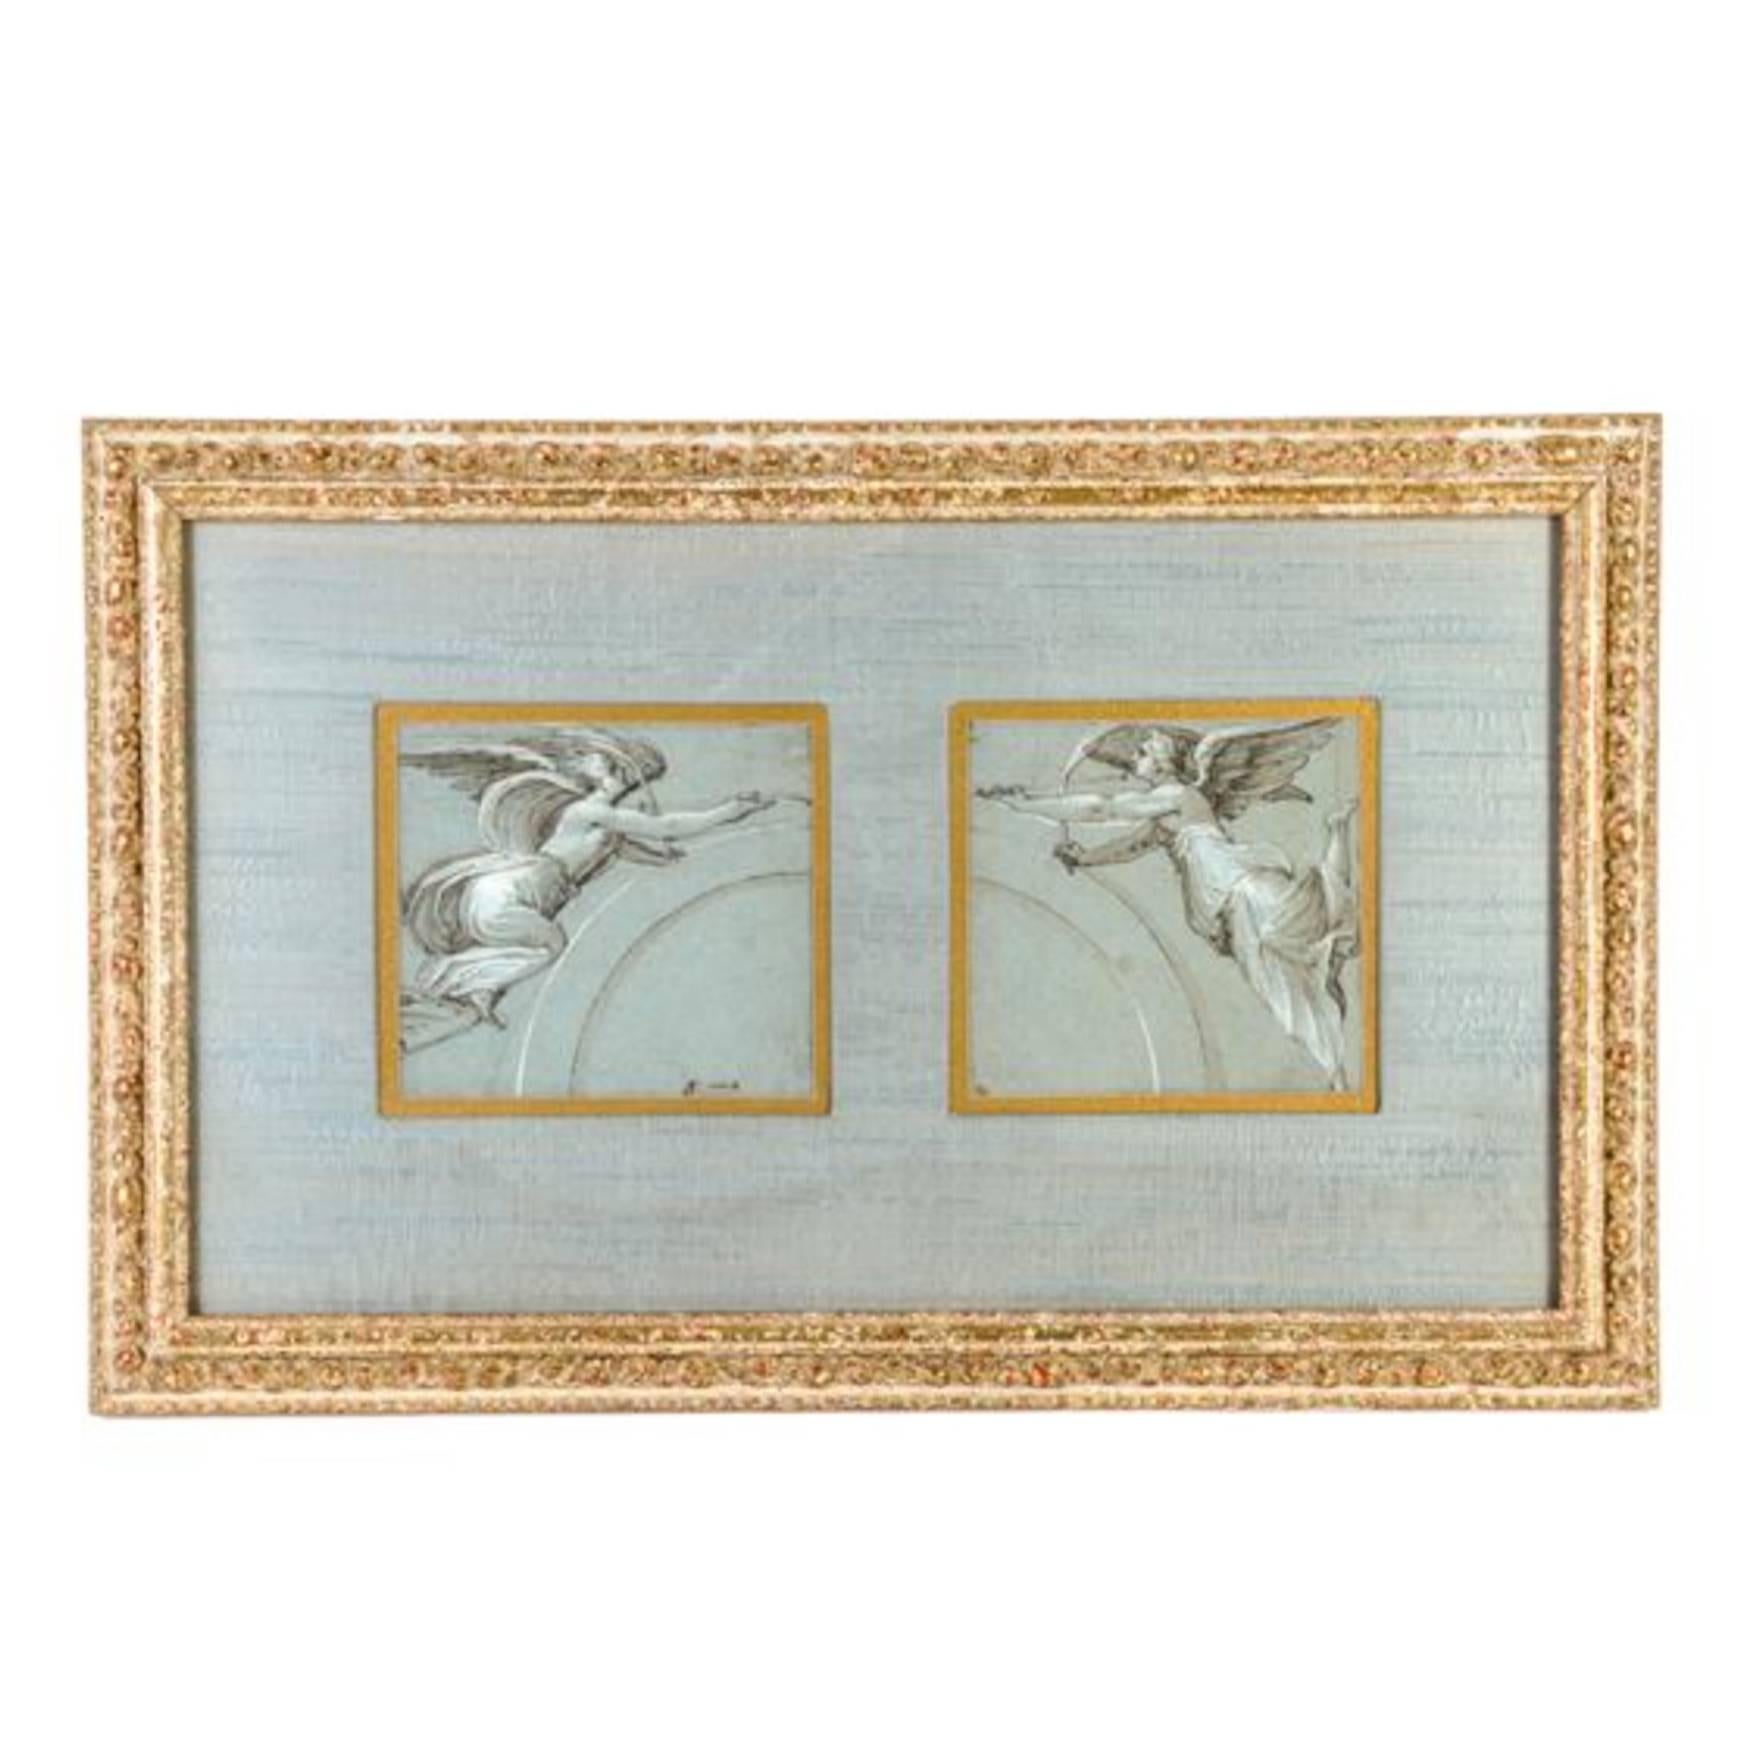 Charming 18th Century French Pastel, "Heralding Angels" in Giltwood Frame